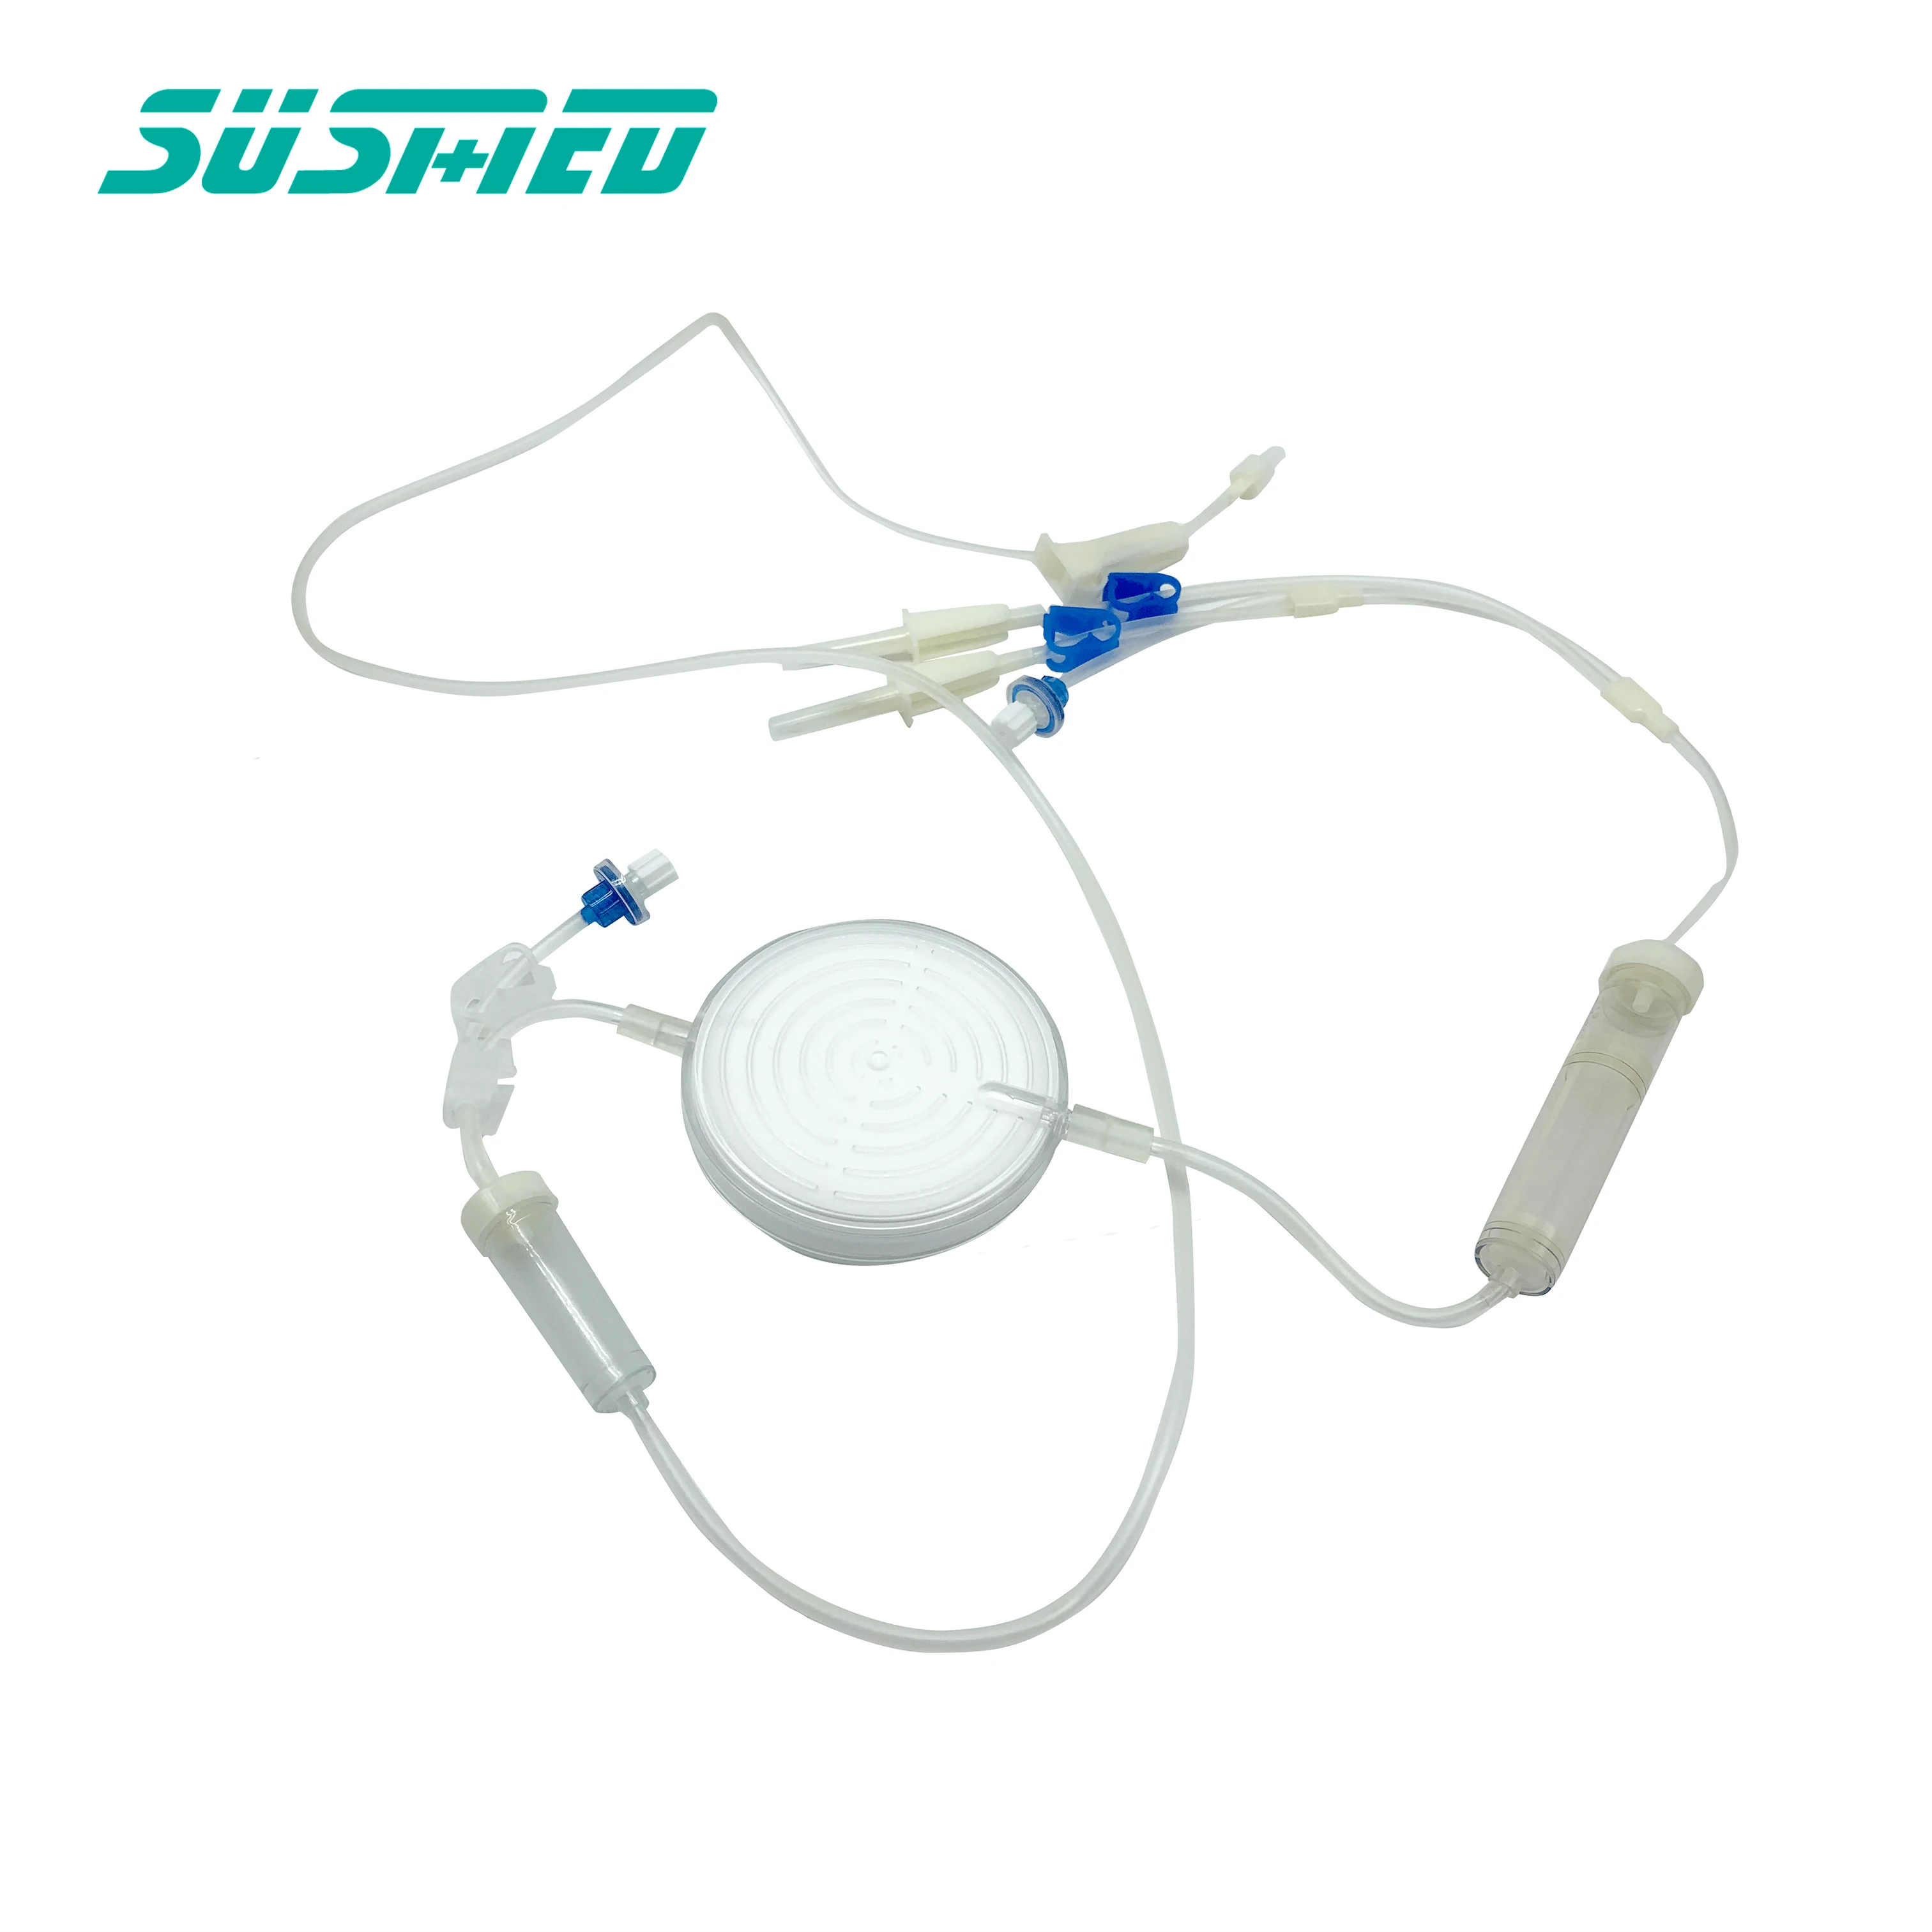 Low cost and high quality leukocyte removal filter for one time transfusion